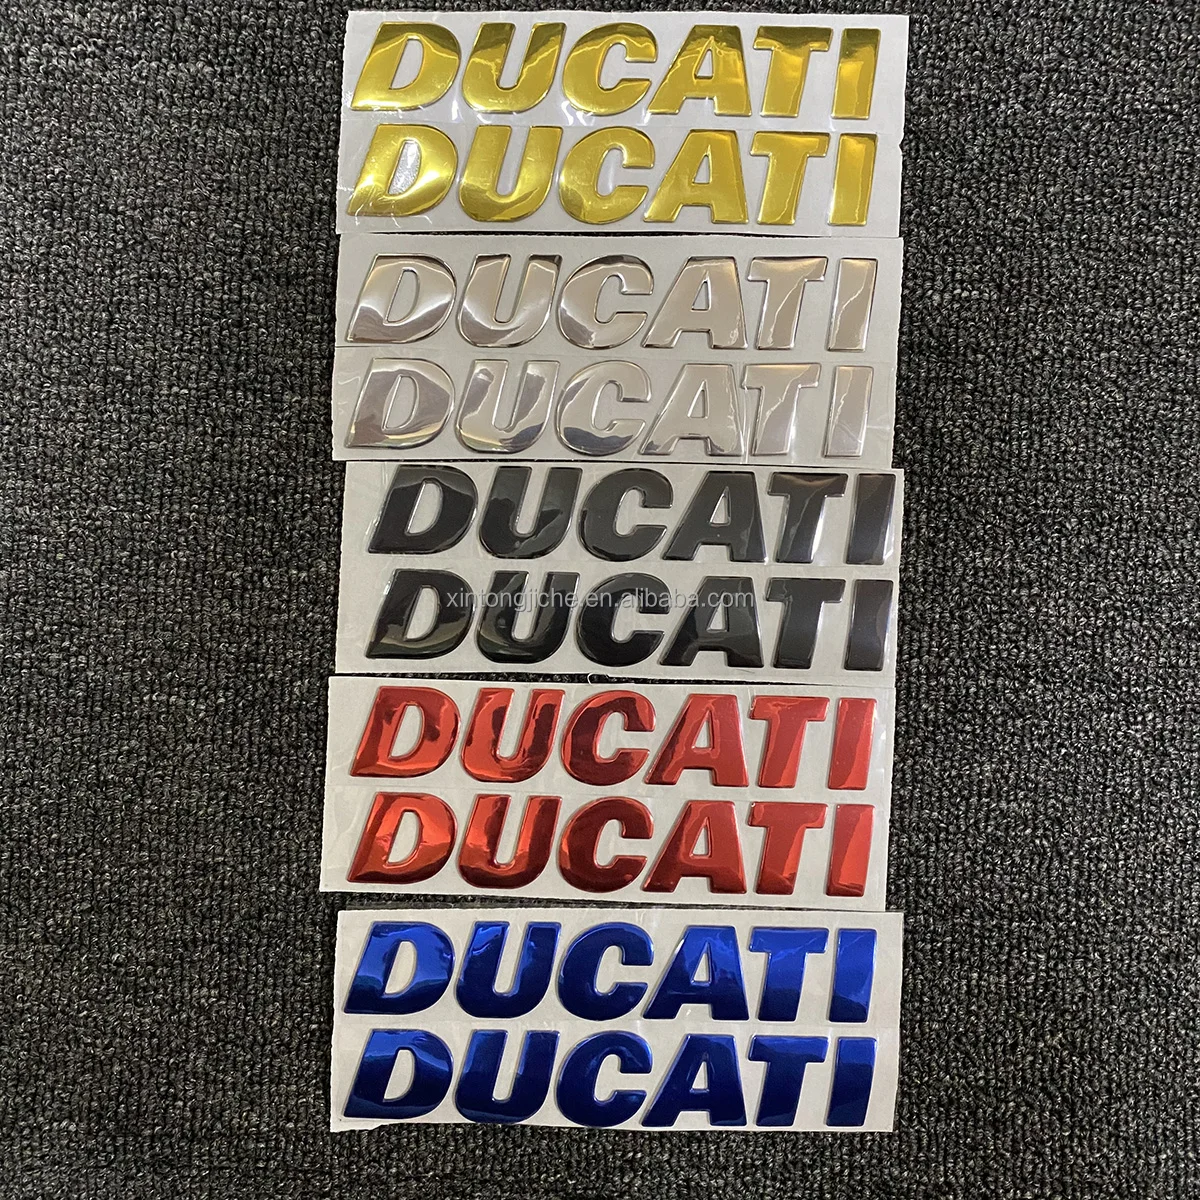 

3D resin ducati corse stickers tank grips emblem decal for ducati 1199 multistrada 1200 796 696 hypermotard accessories